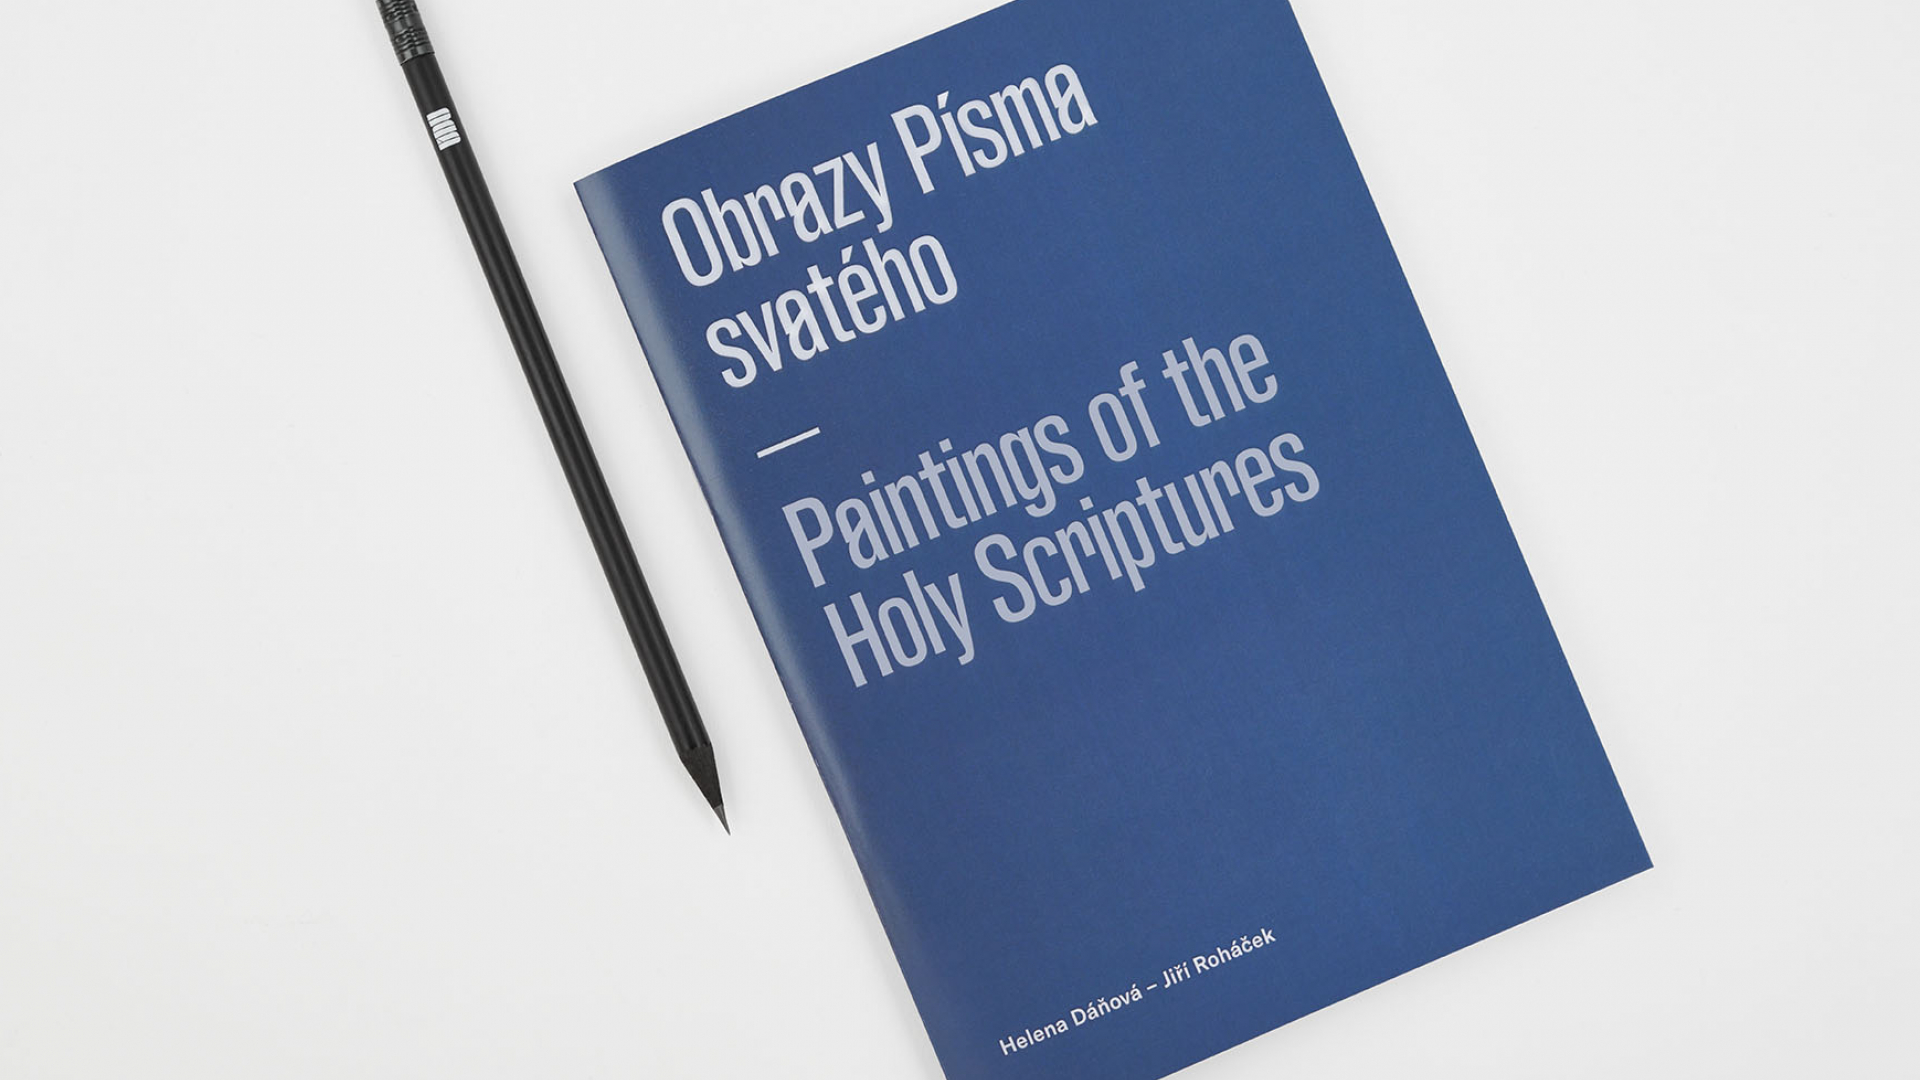 Paintings of the Holy Scriptures